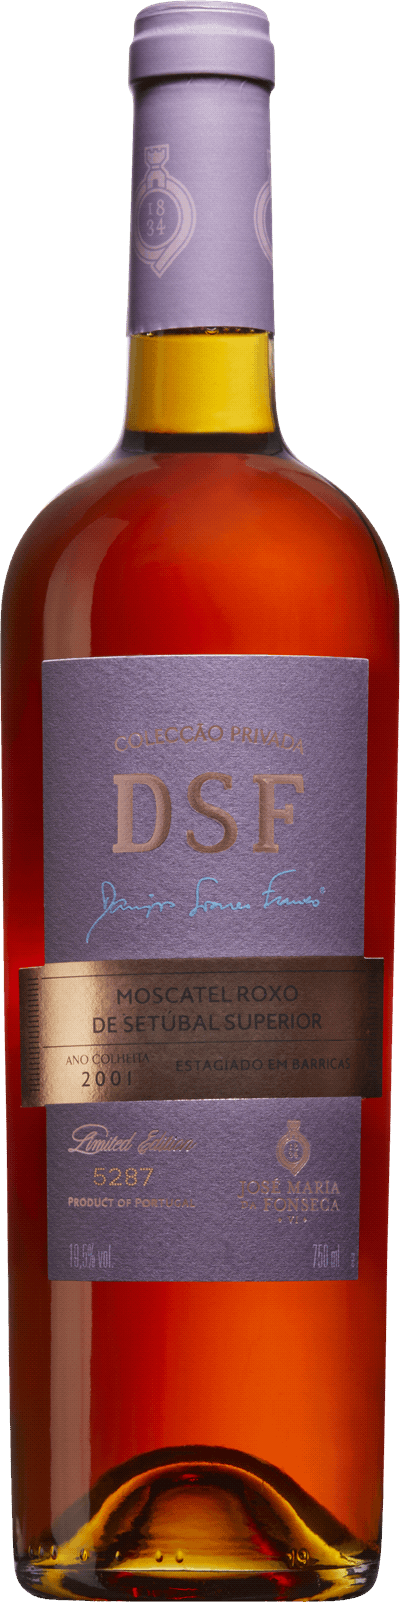 Collection Roxo 2001 | Moscatel Setùbal Superior, de Systembolaget DSF